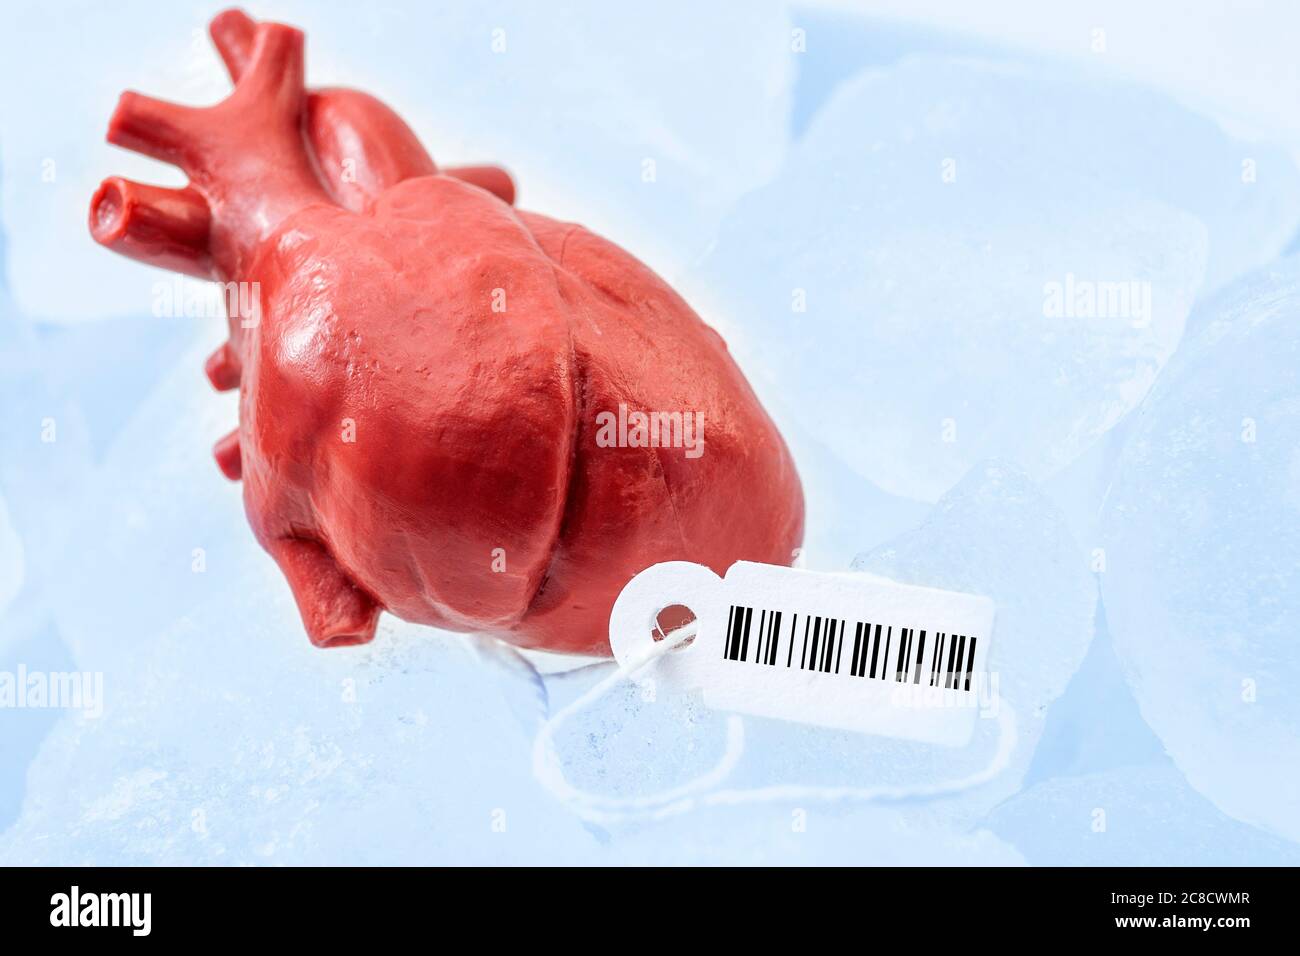 Human organ traffic, internal organs black market and illegal medical procedure concept theme with frozen donor heart with tag and barcode attached, p Stock Photo